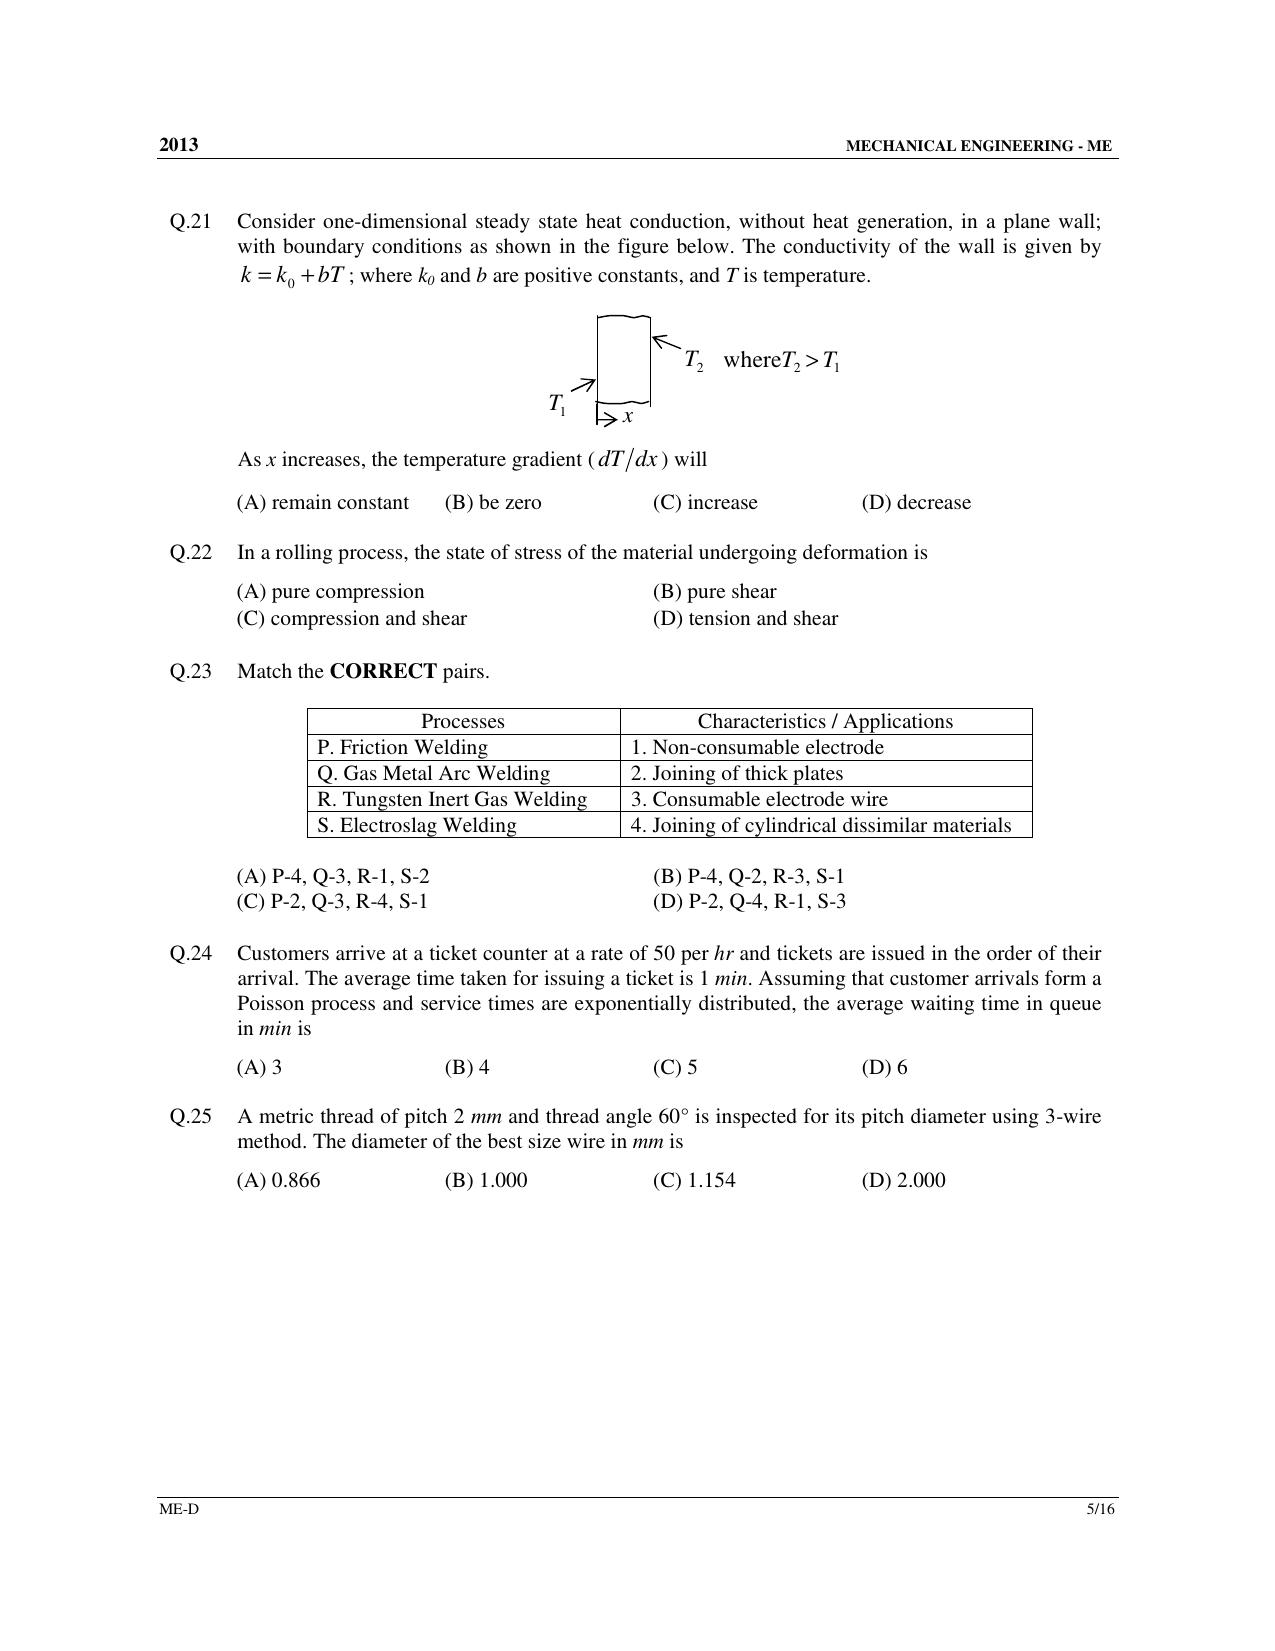 GATE 2013 Mechanical Engineering (ME) Question Paper with Answer Key - Page 48